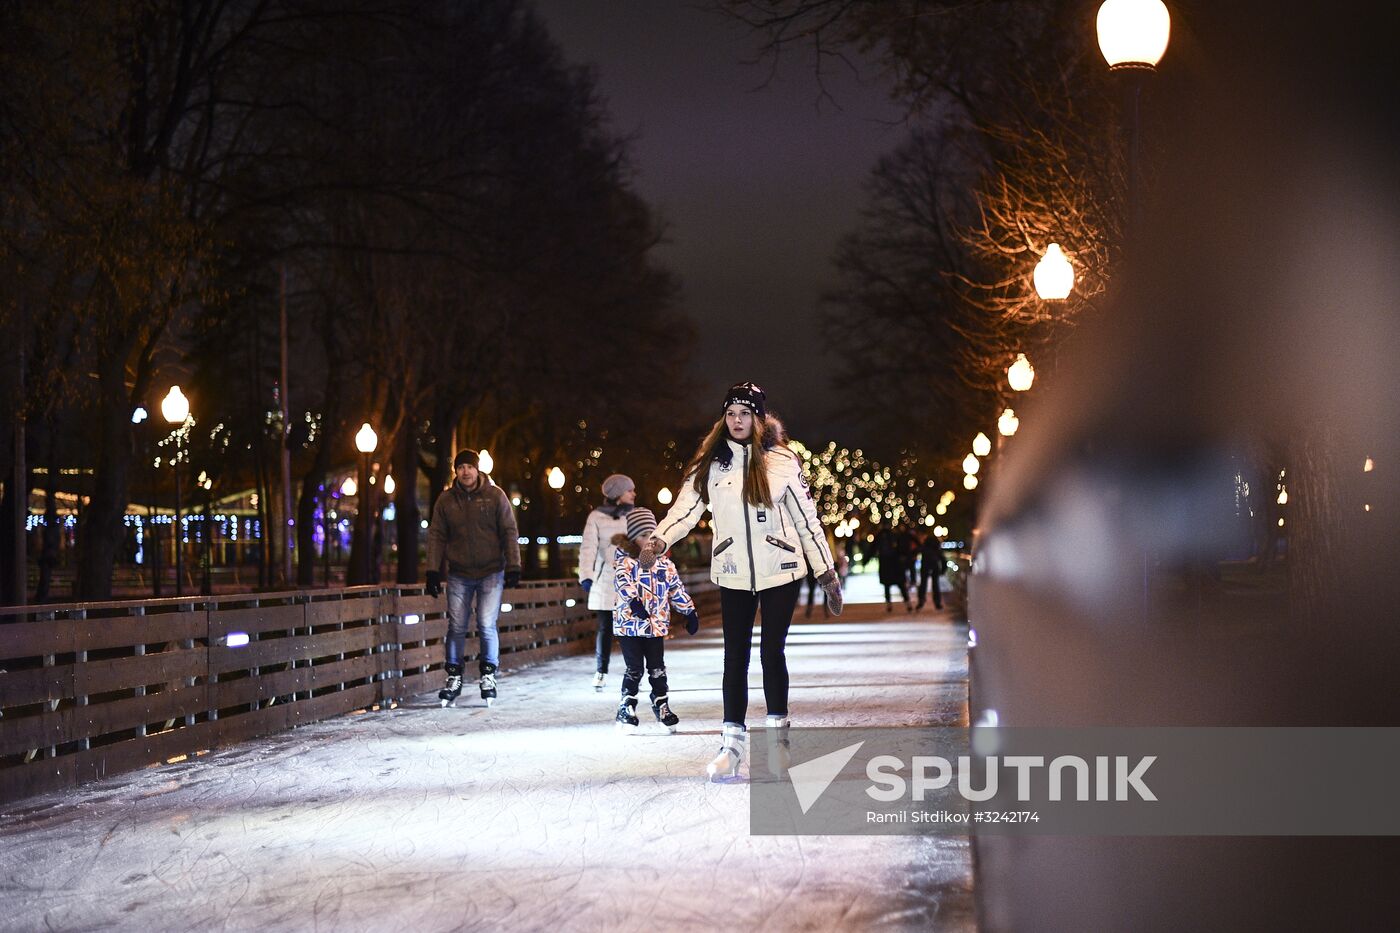 Stereo ice rink opens in Gorky Park